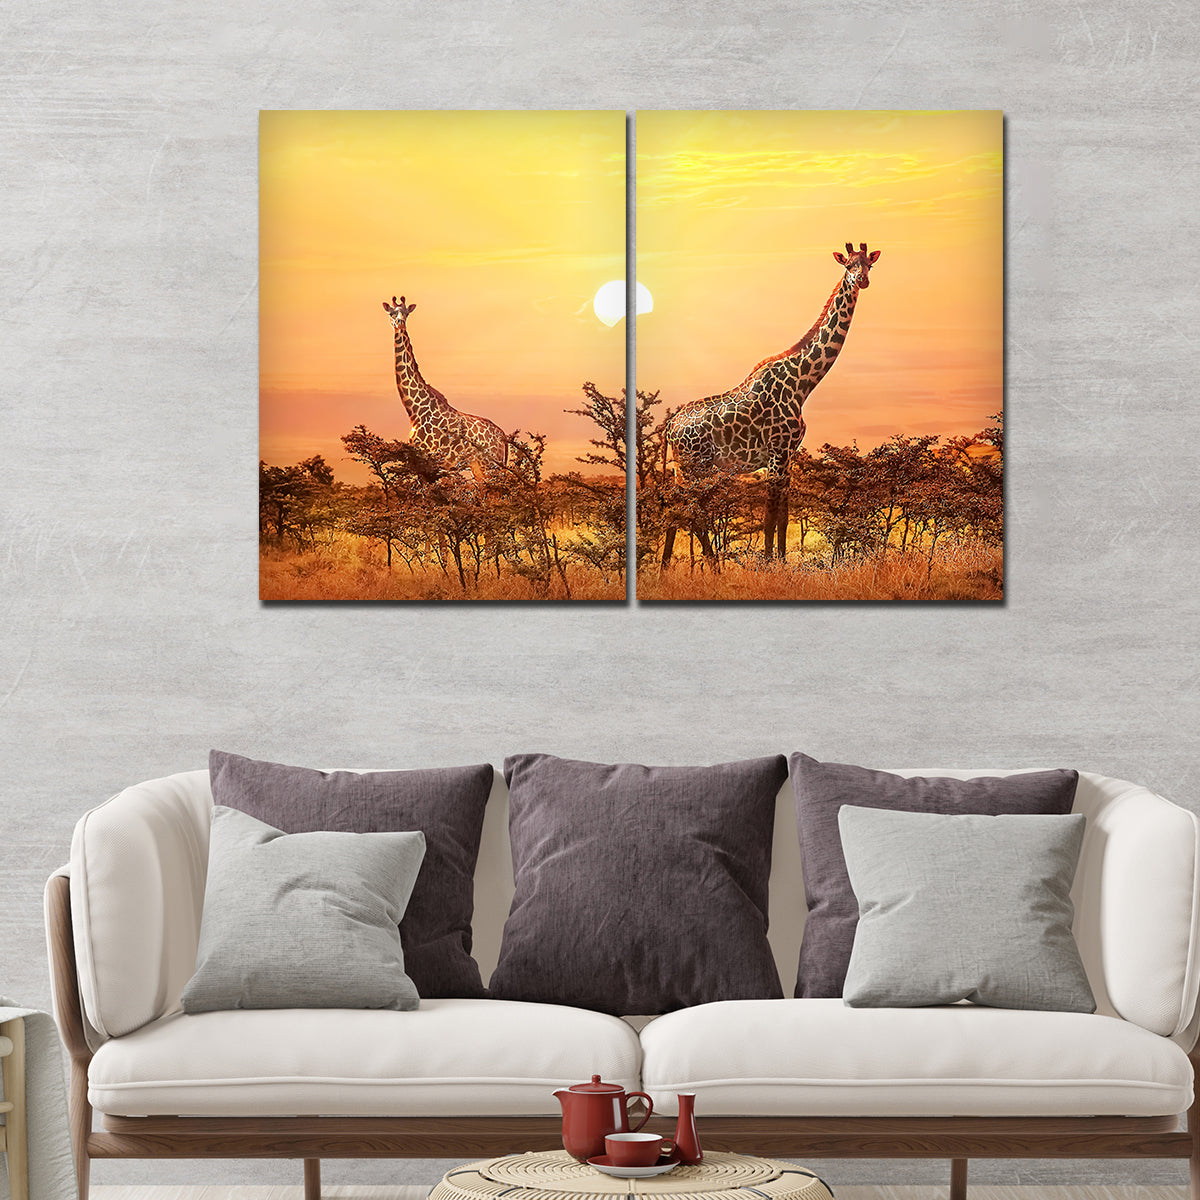 Premium 2 Pieces Wall Painting of Giraffes in Sunset